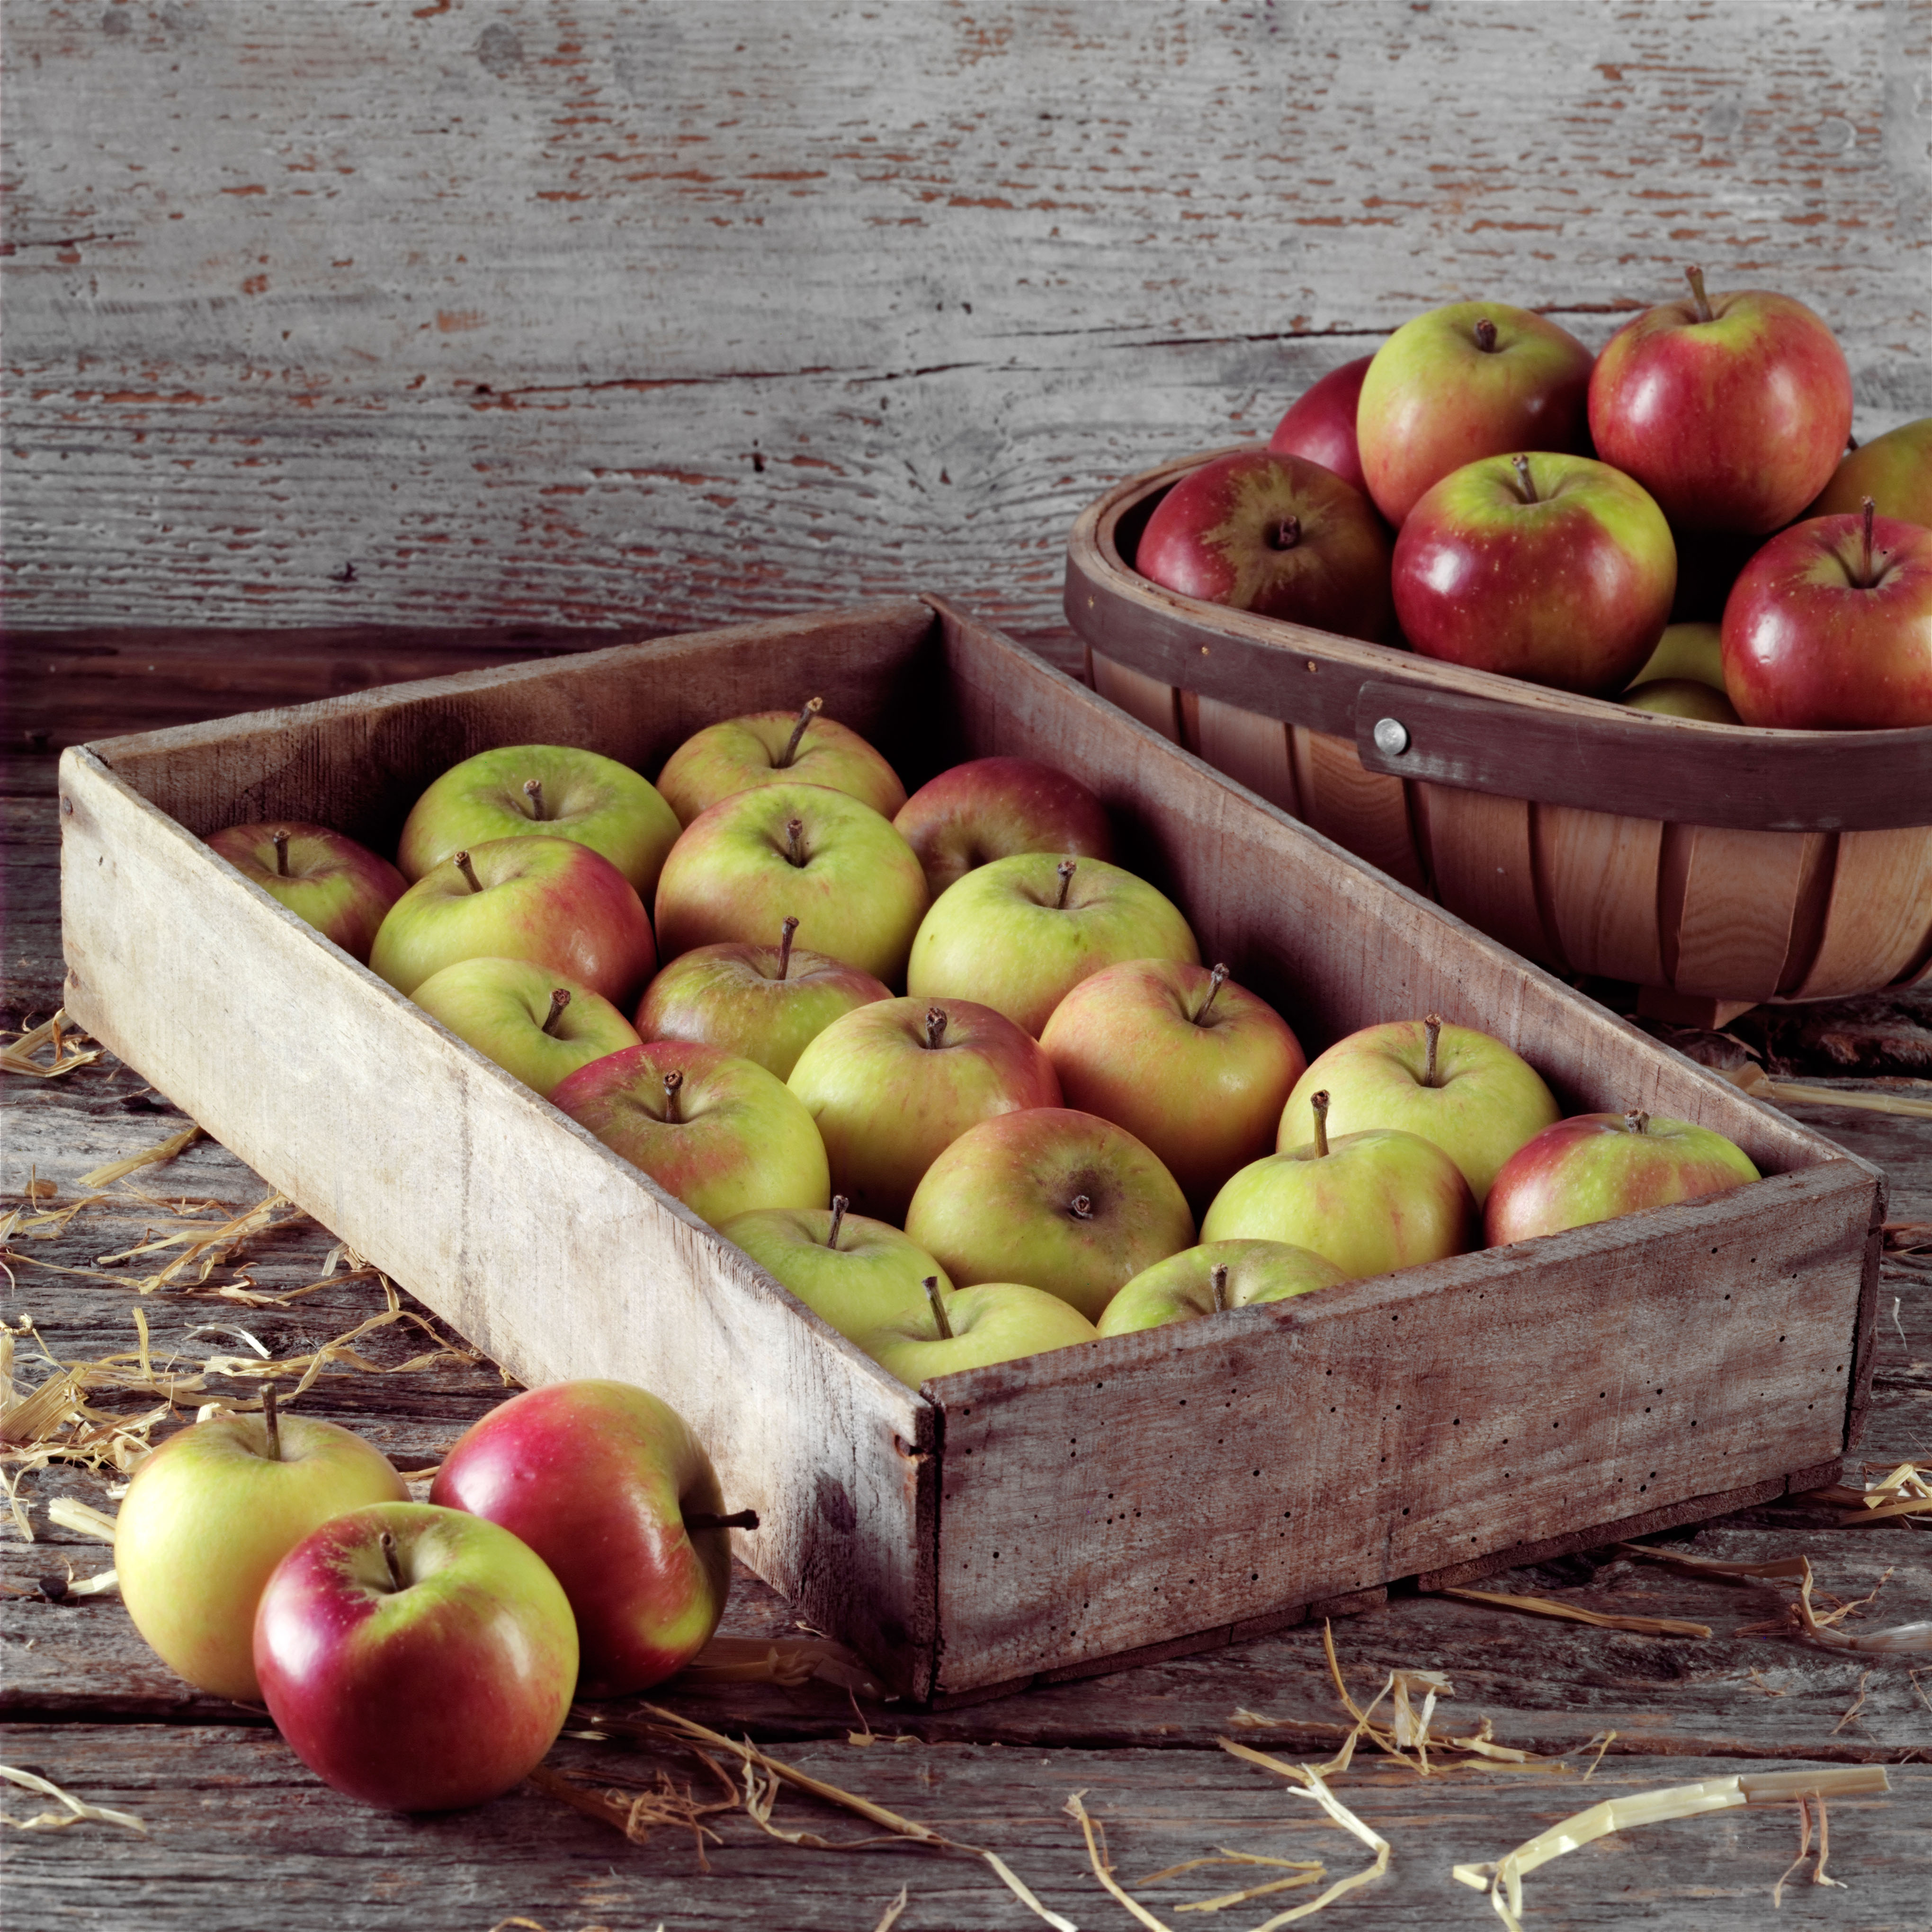 Apples in a crate (Alamy/PA)